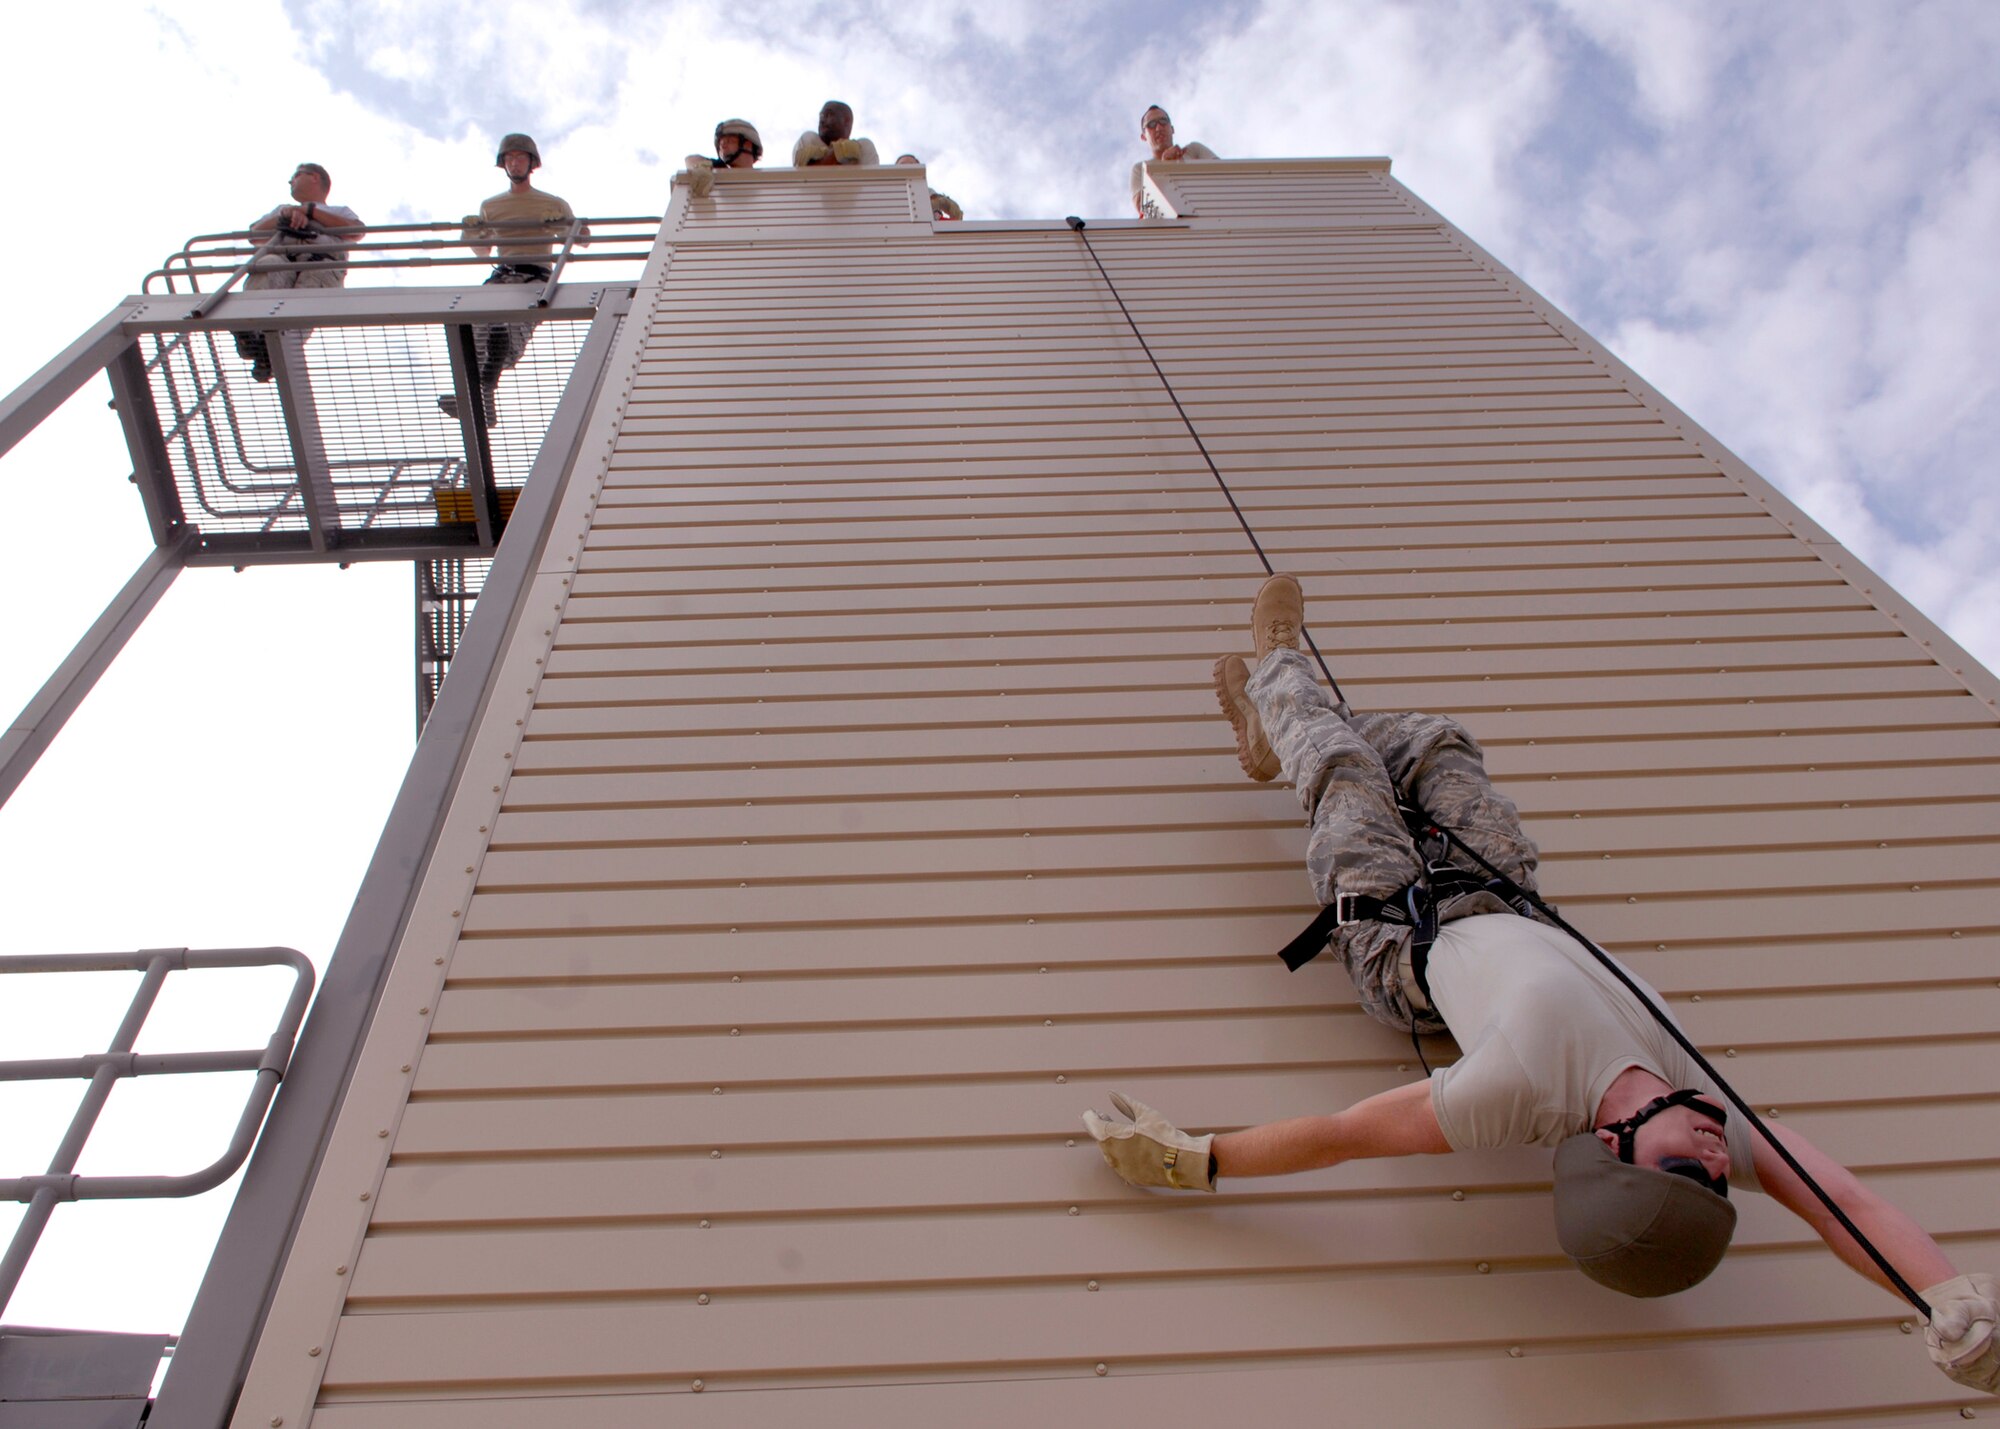 CANNON AIR FORCE BASE, N.M. -- Tech.Sgt. Gregory Neuberger, 27th Special Operations Security Forces Squadron, rappels Austrailian style during a security forces exercise Aug. 29. The tower, usually used by base firefighters, helped build team and individual confidence for security forces airmen. (U.S. Air Force photo/Airman 1st Class Evelyn Chavez)